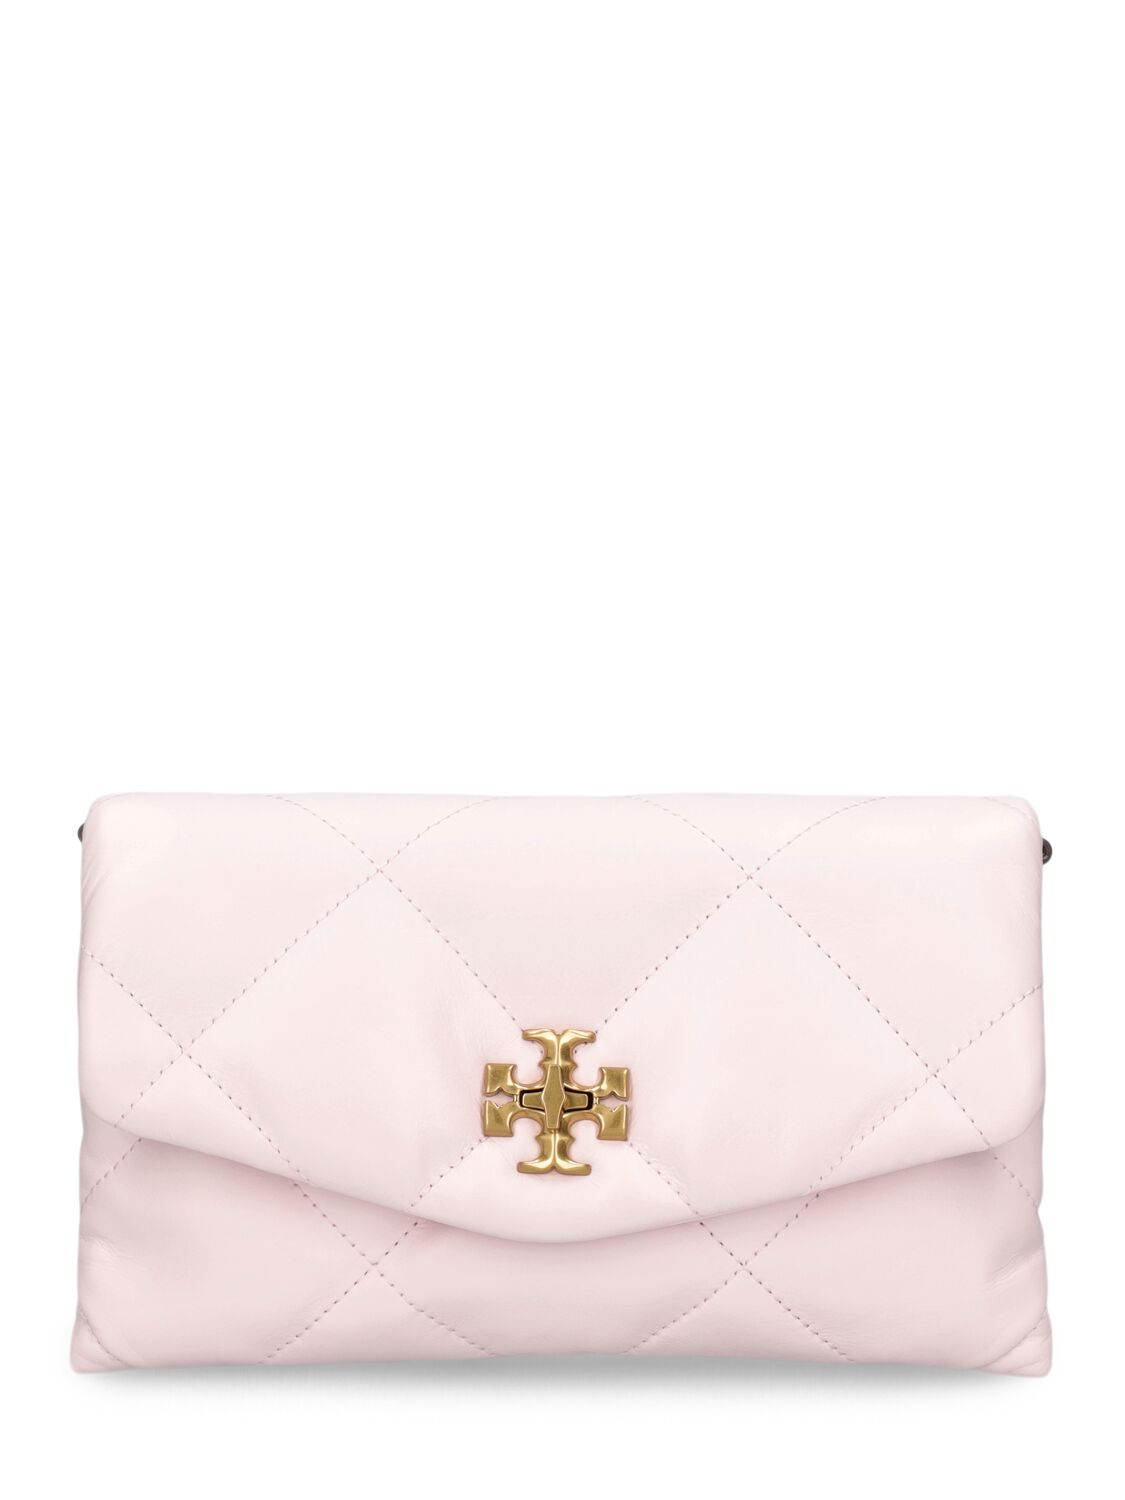 Kira Diamond Quilted Wallet W/ Chain